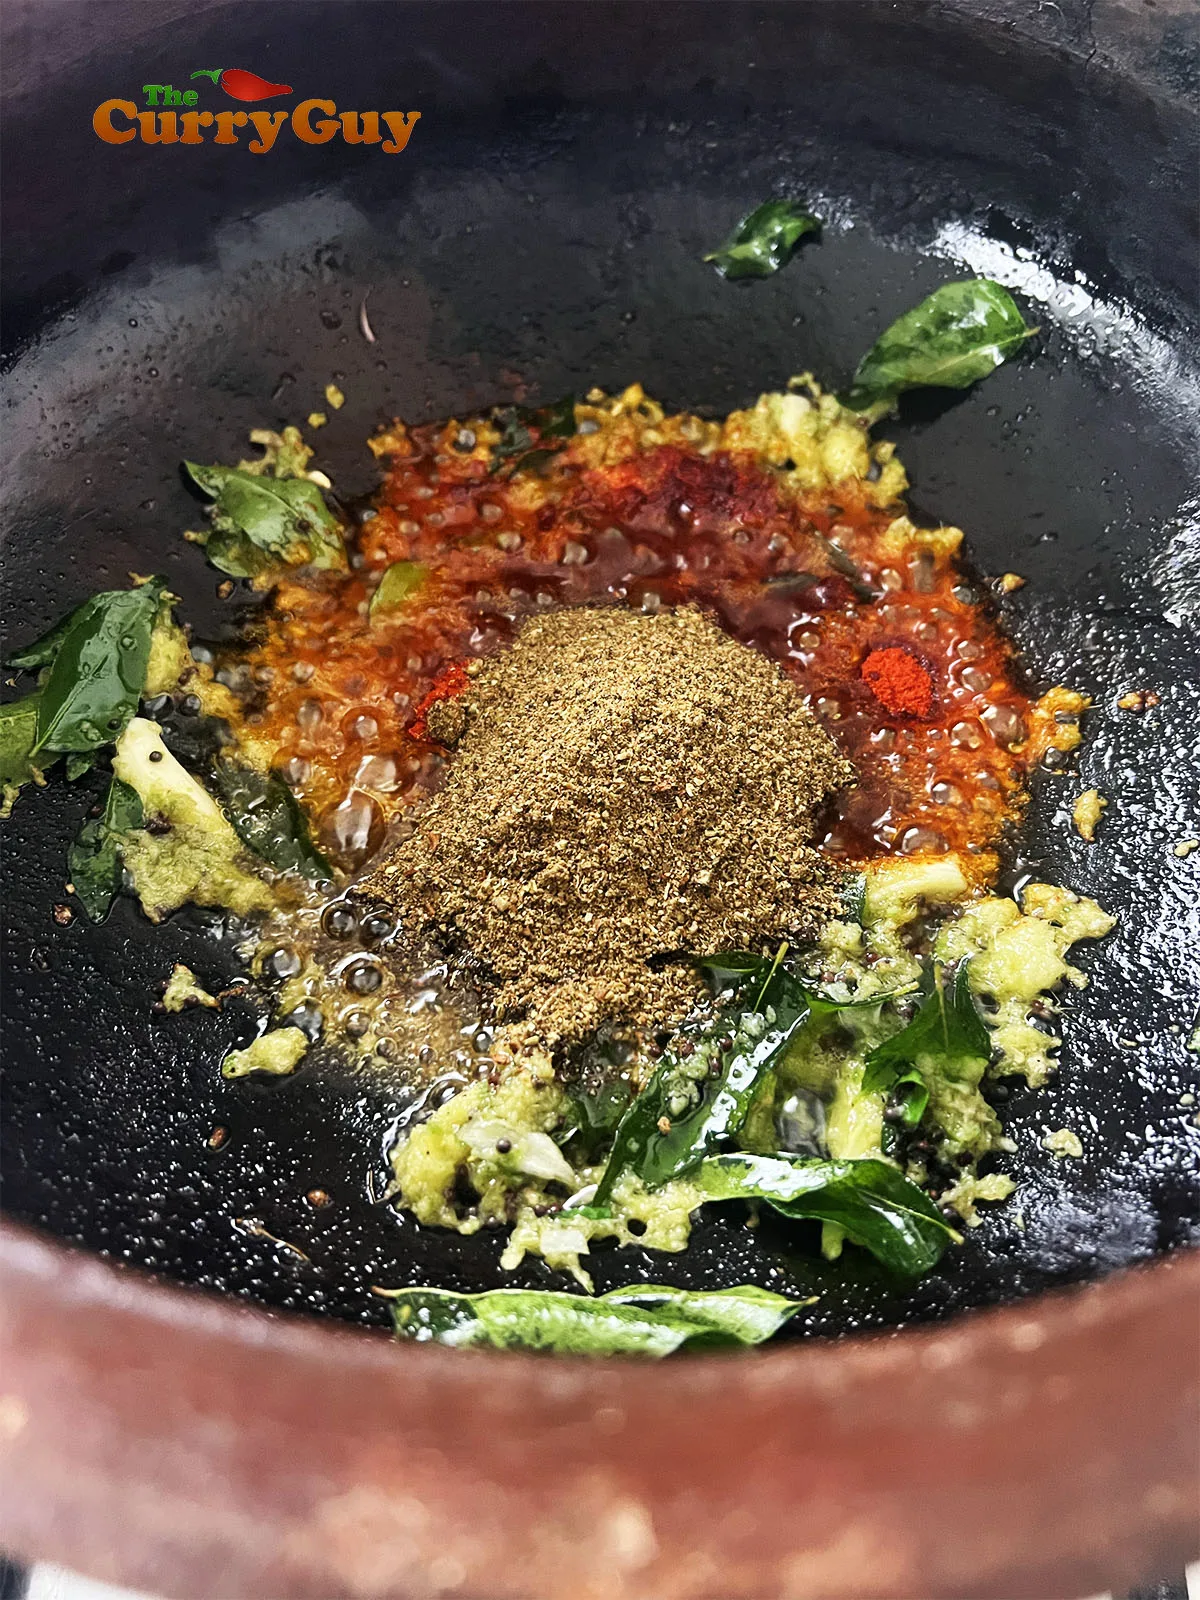 Adding ground spice blend and also chilli powder to the oil.